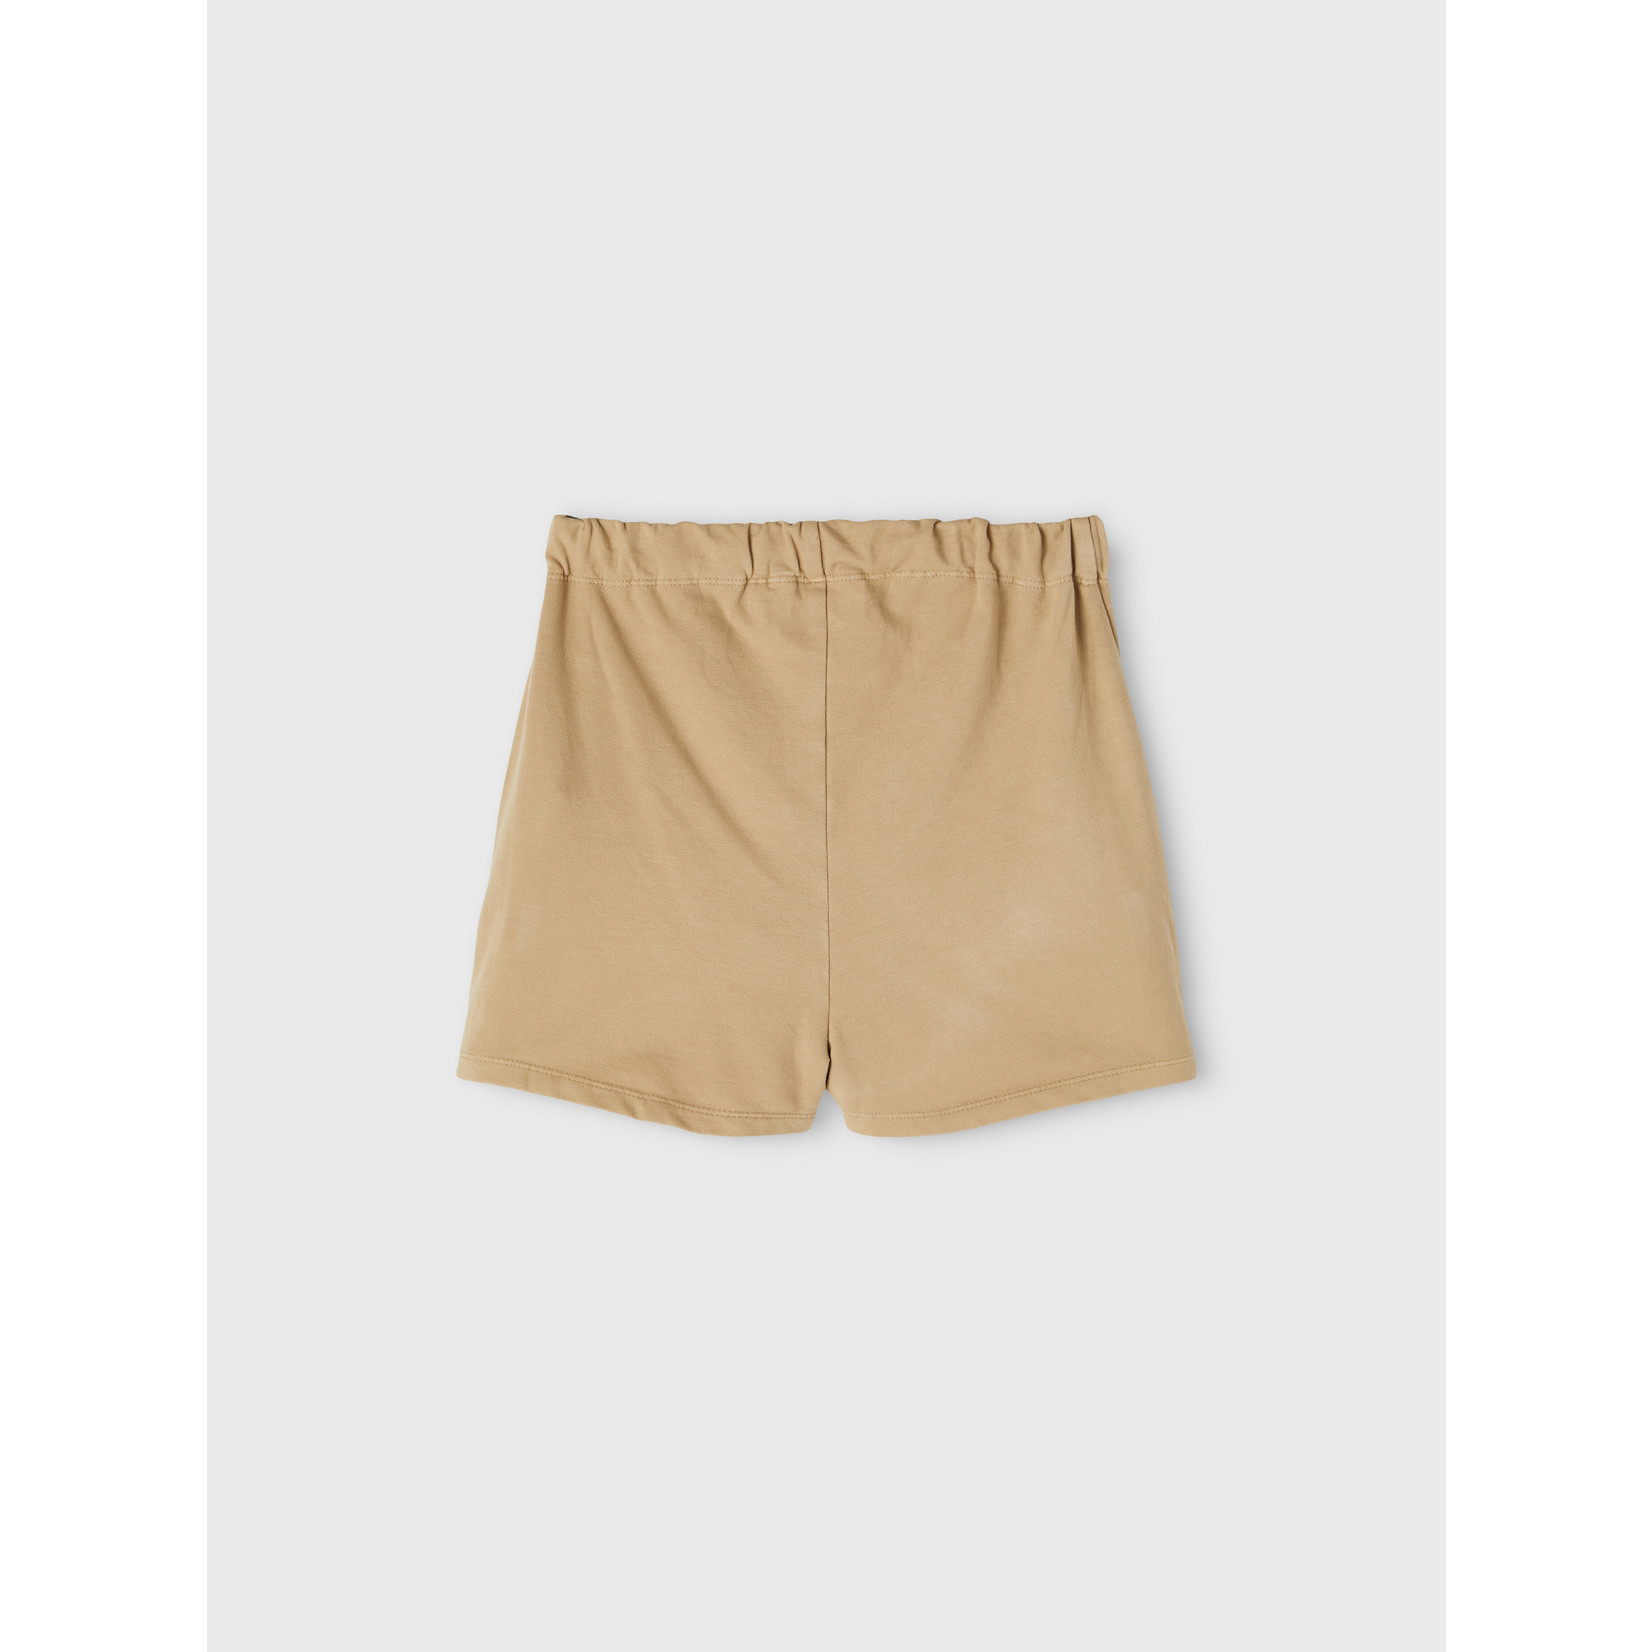 Lil Atelier Lil Atelier - NMNHIBO LOOSE SHORTS LIL - Iced Coffee